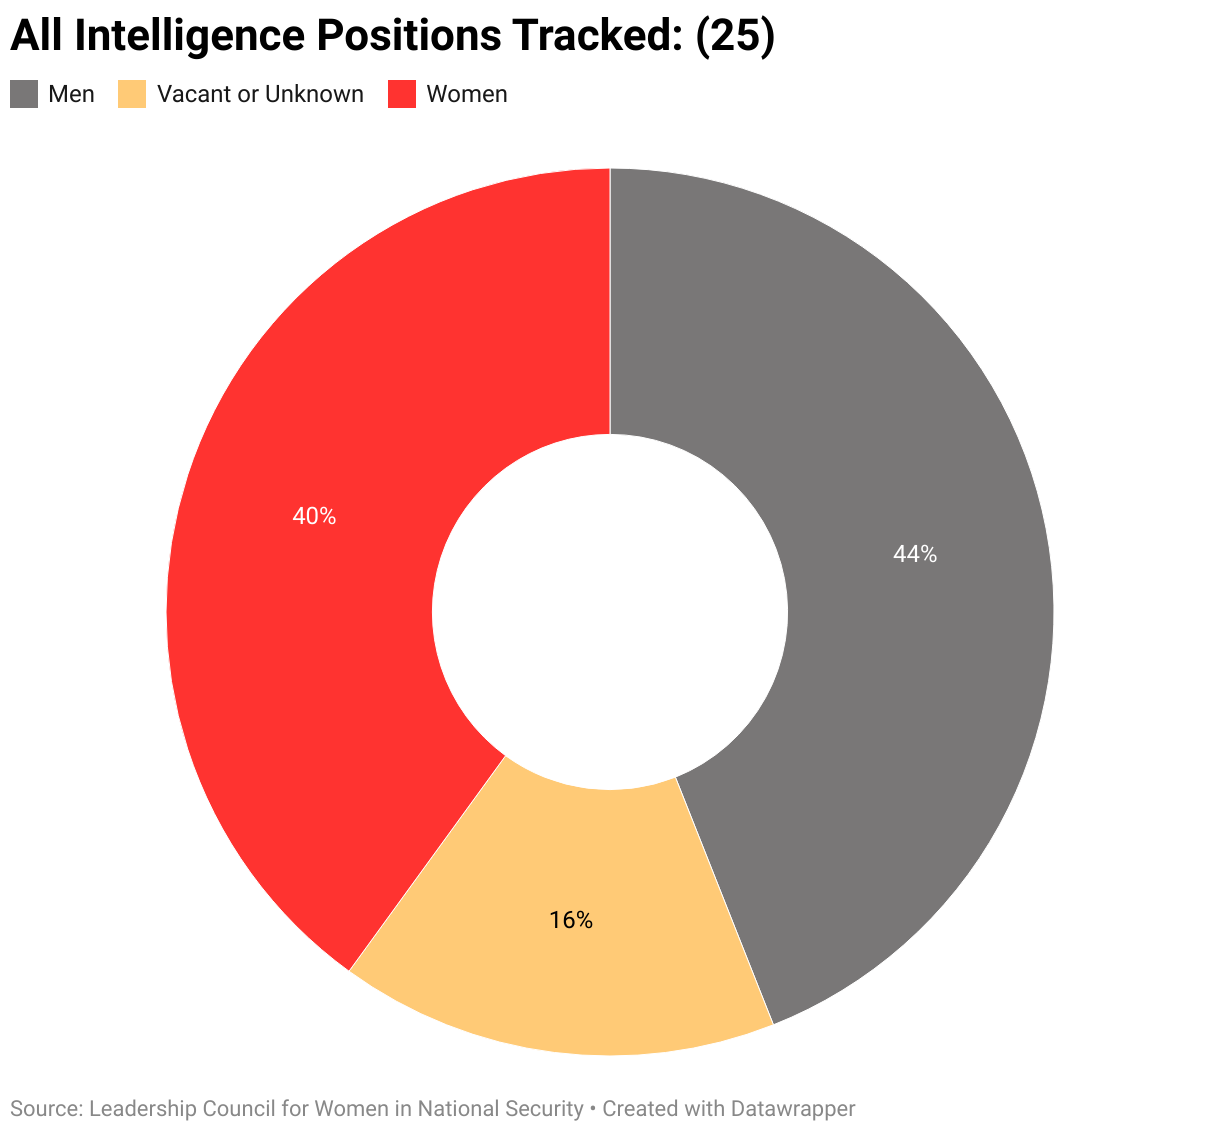 The gendered breakdown of all intelligence positions tracked by LCWINS (25).